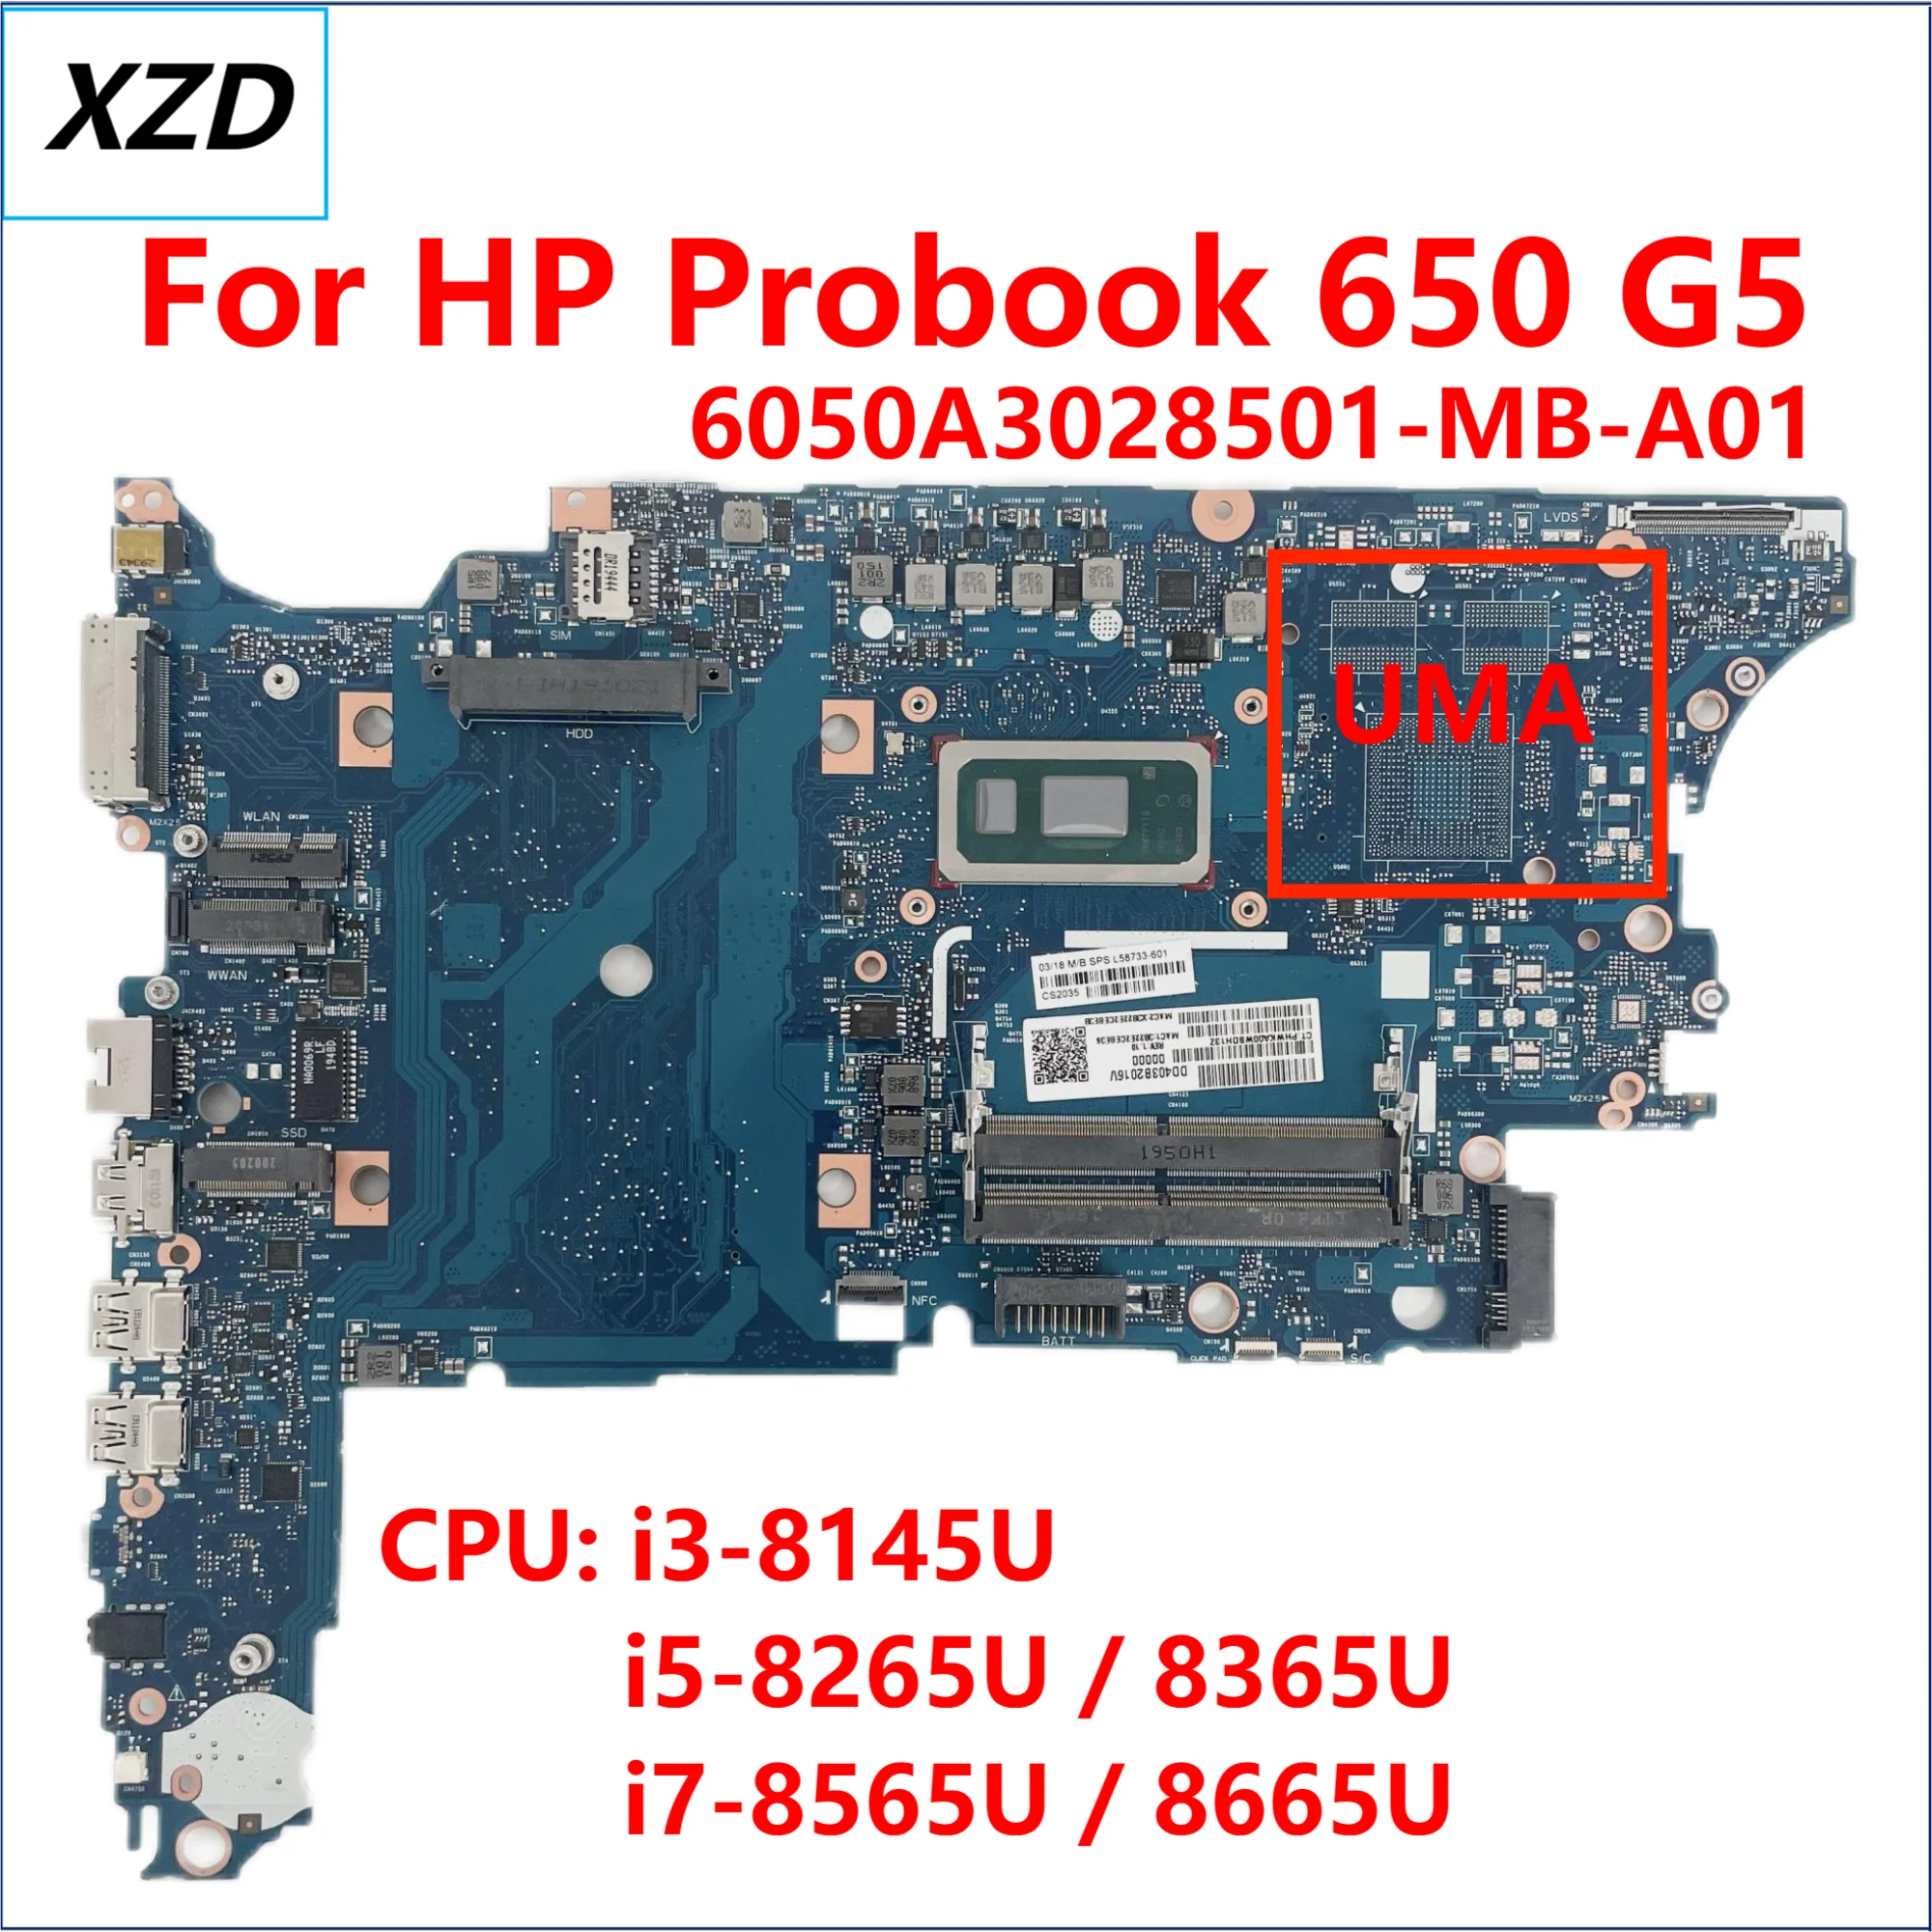 

COCONUT 6050A3028501-MB-A01 Mainboard For HP Probook 650 G5 Laptop Motherboard With I3 I5 I7 CPU L58735-601 L58733-601 100% OK